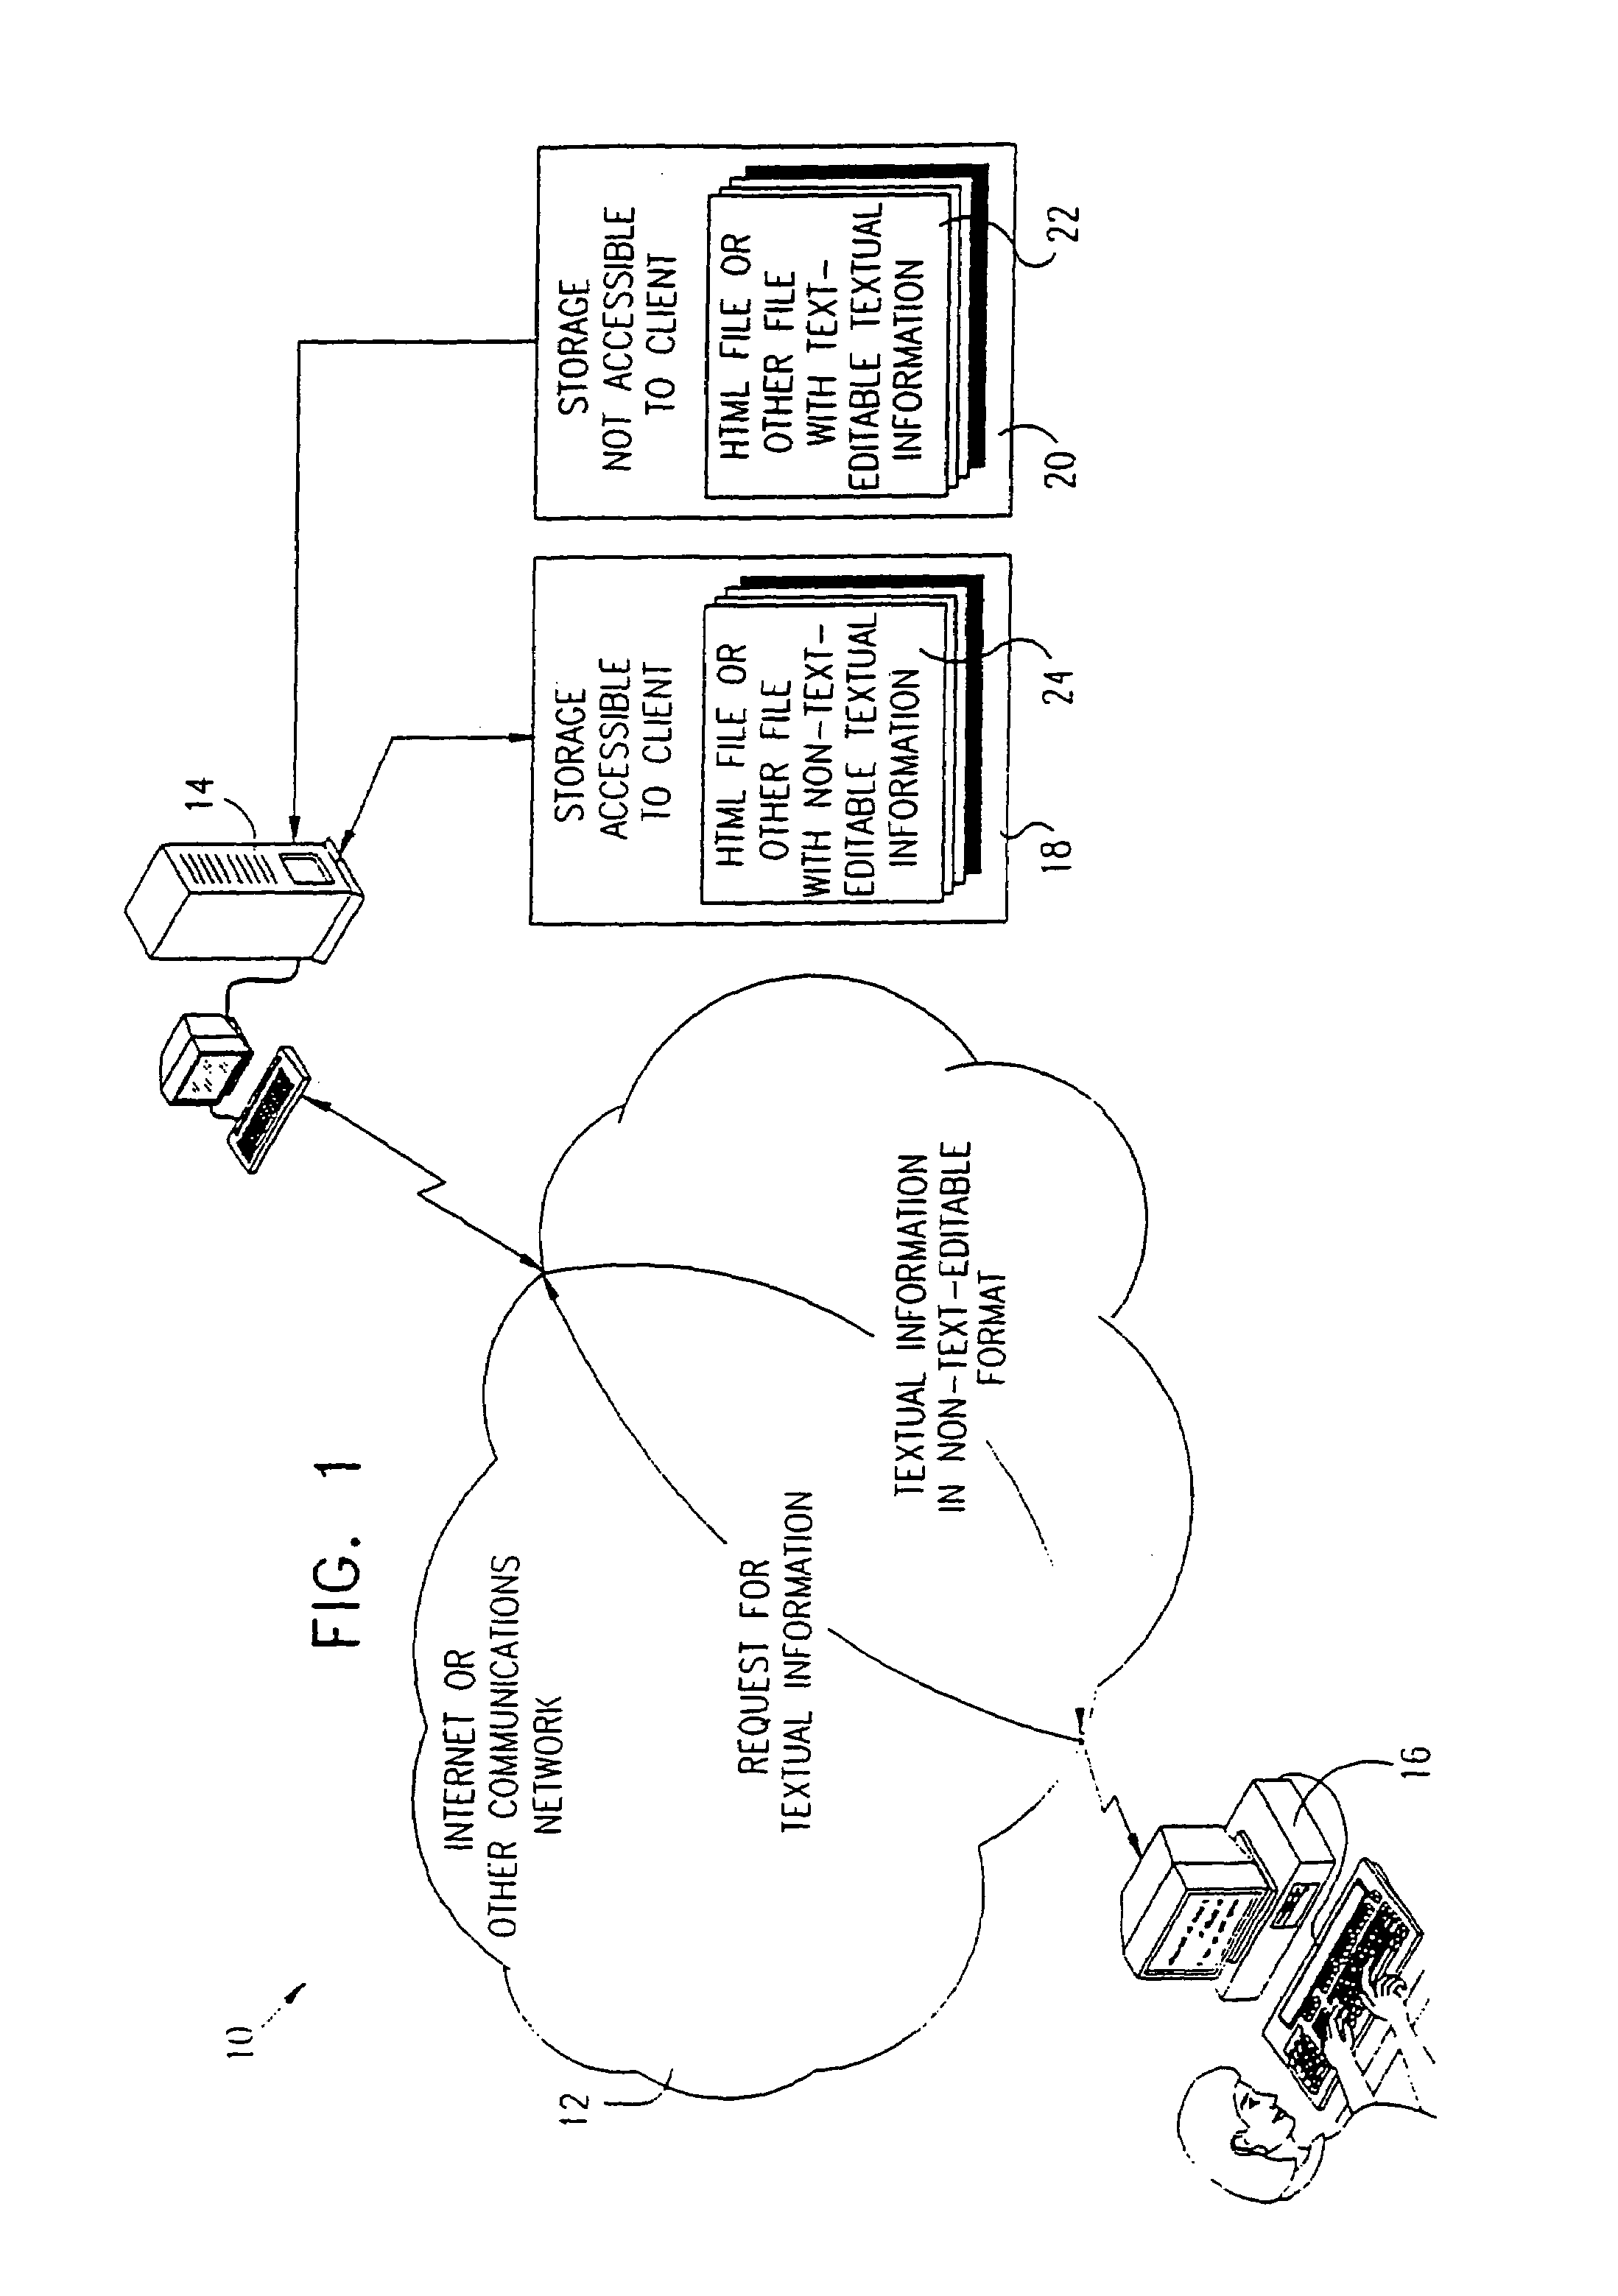 Method and apparatus for preventing reuse of text, images and software transmitted via networks